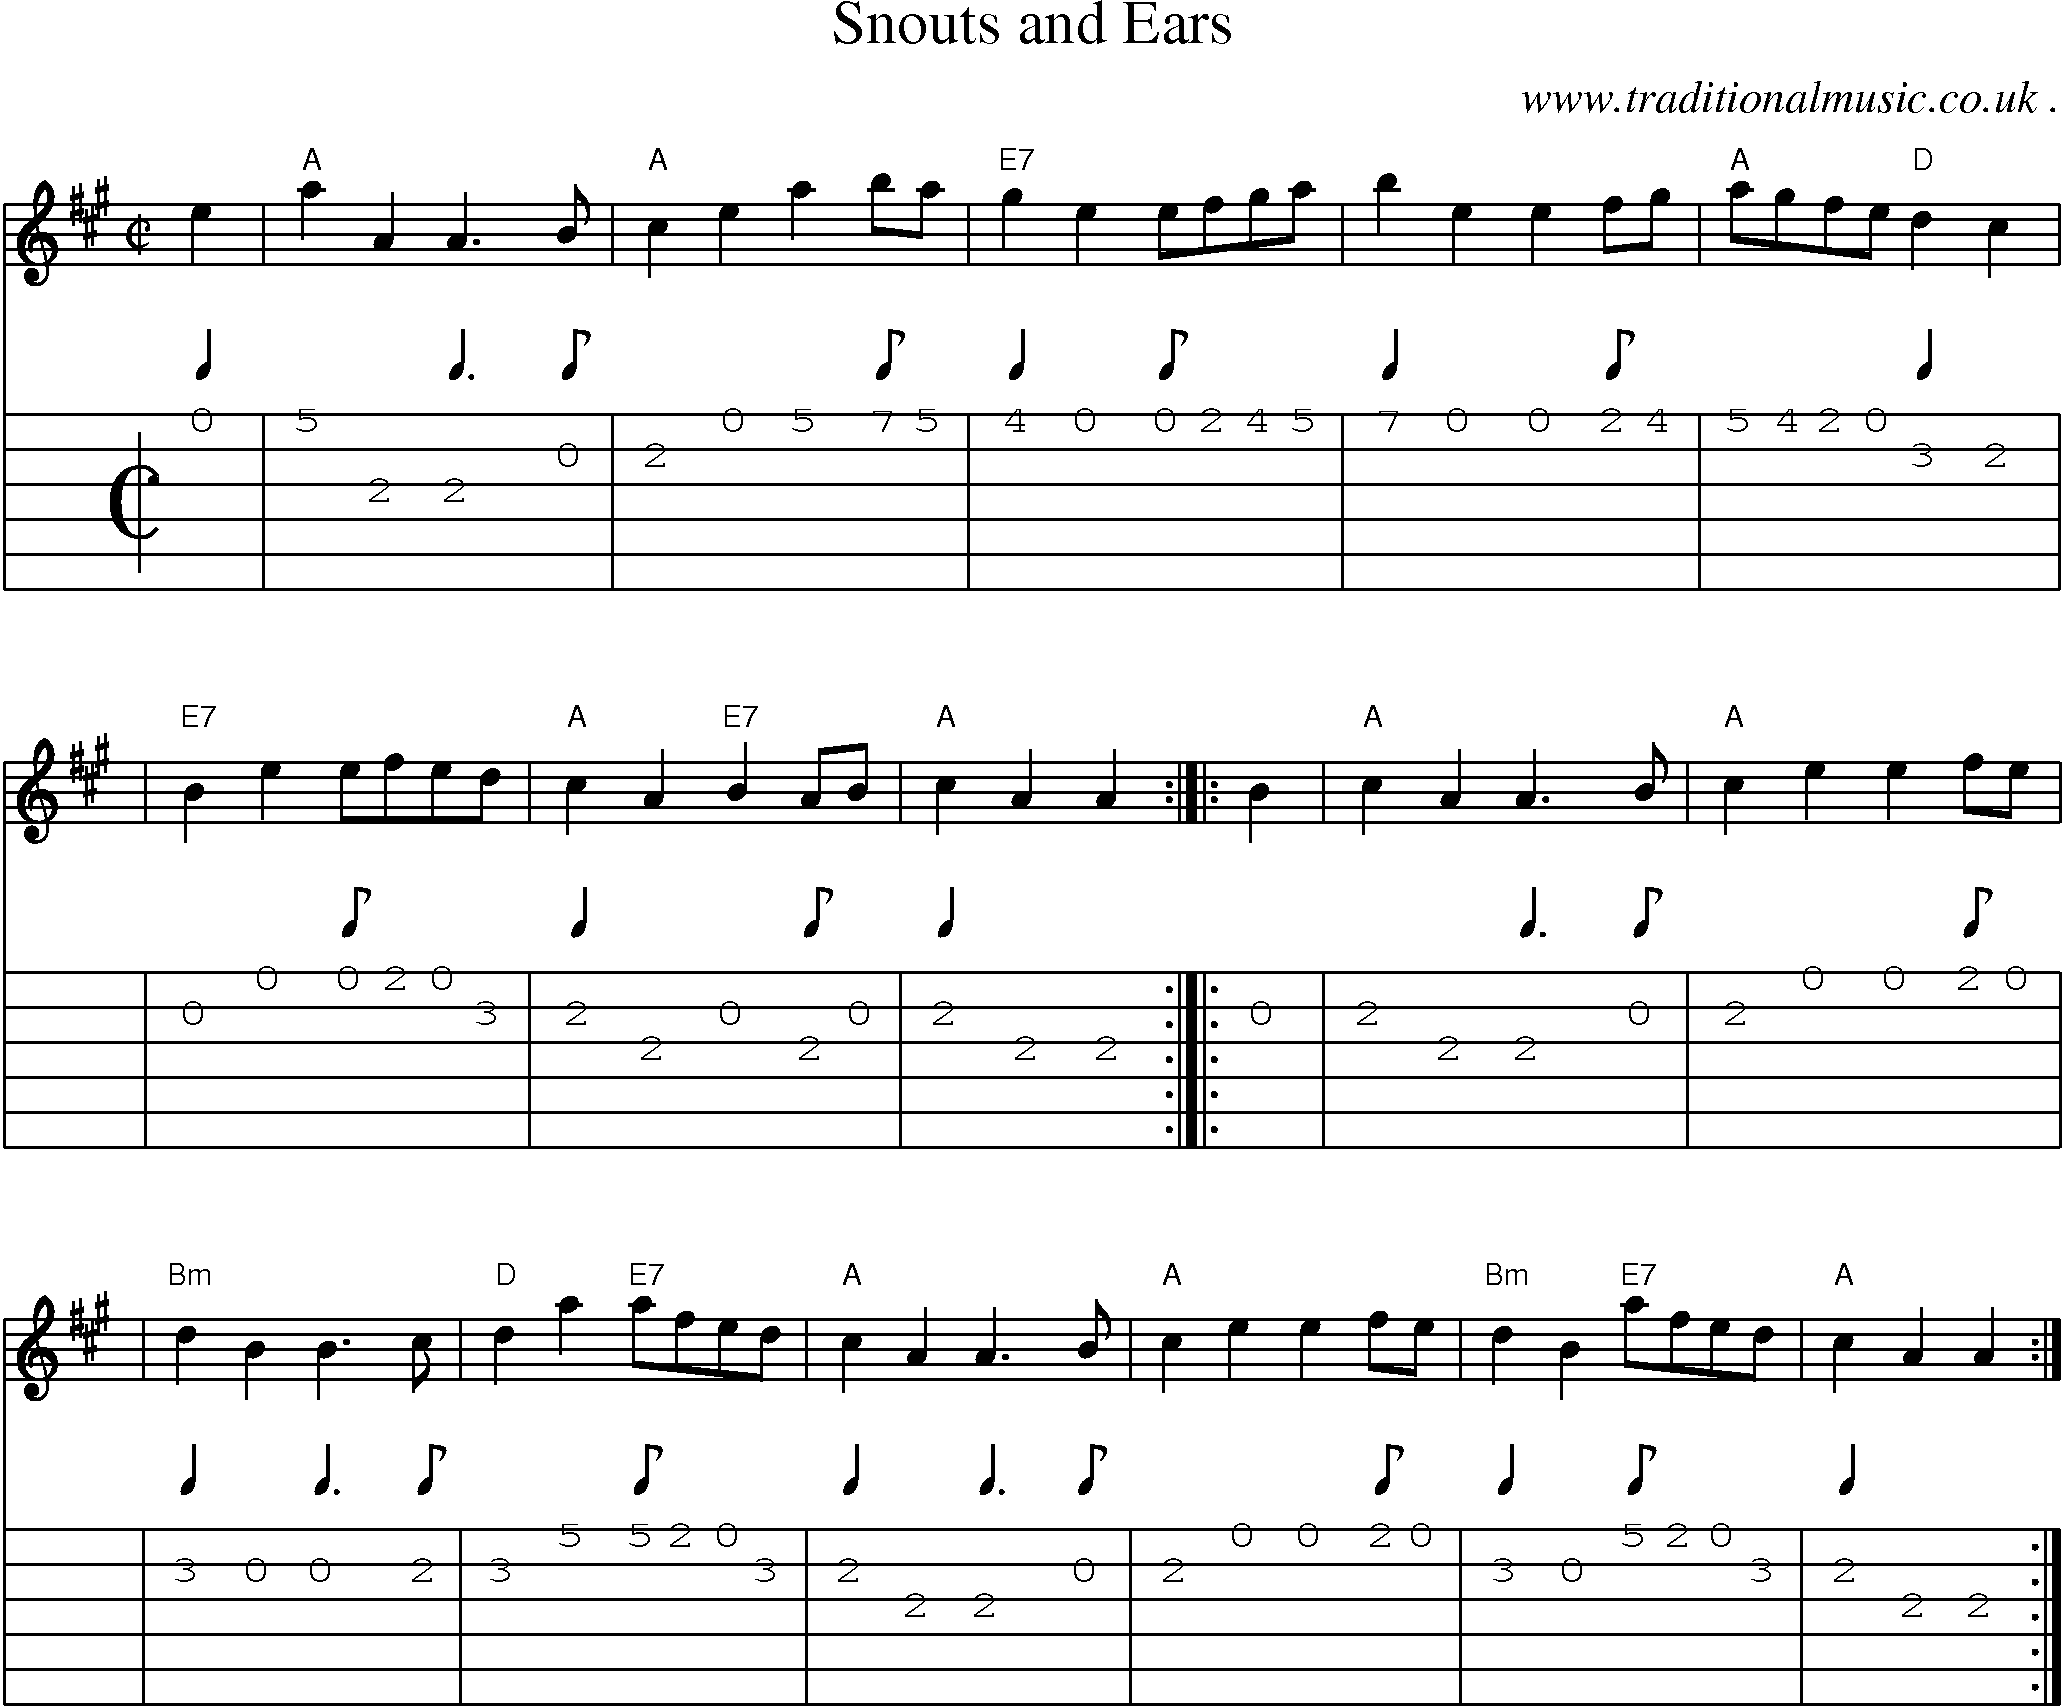 Sheet-music  score, Chords and Guitar Tabs for Snouts And Ears